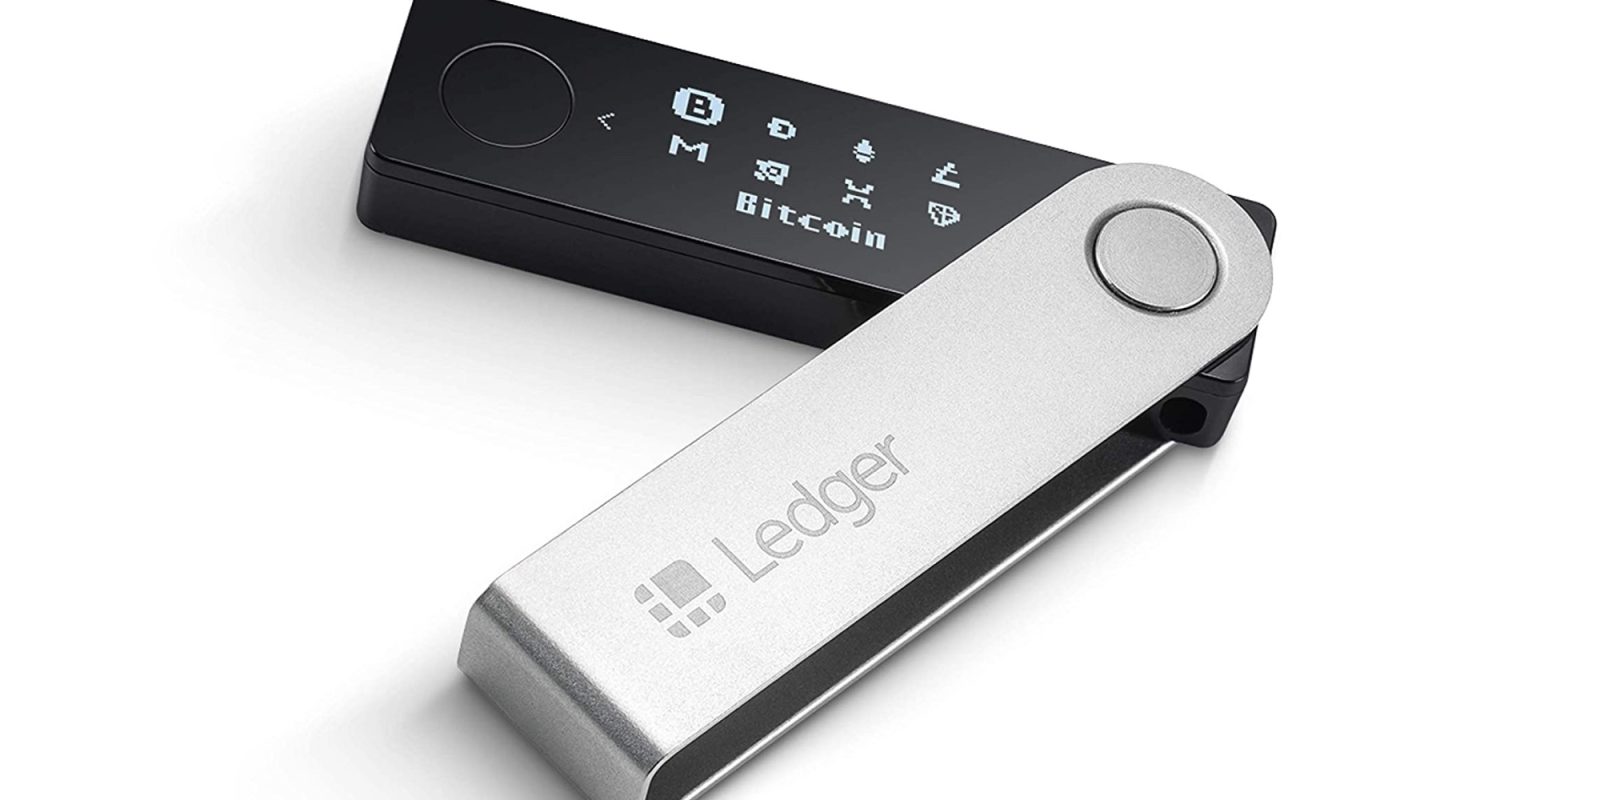 Get serious about crypto with up to 25% off Ledger's hardware wallets